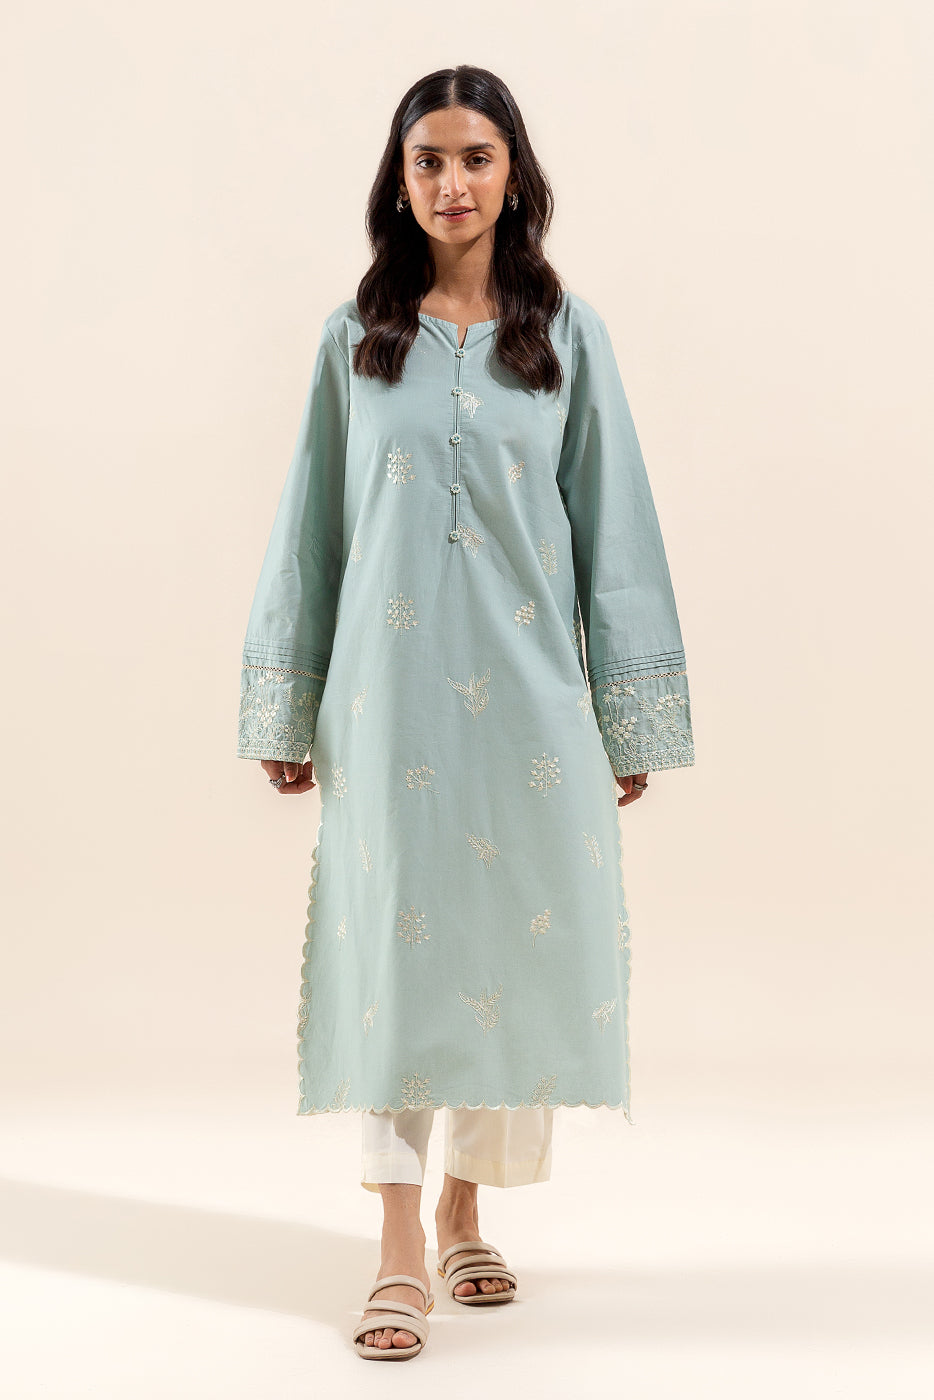 1 PIECE EMBROIDERED LAWN SHIRT-DUSKY DEW (UNSTITCHED)